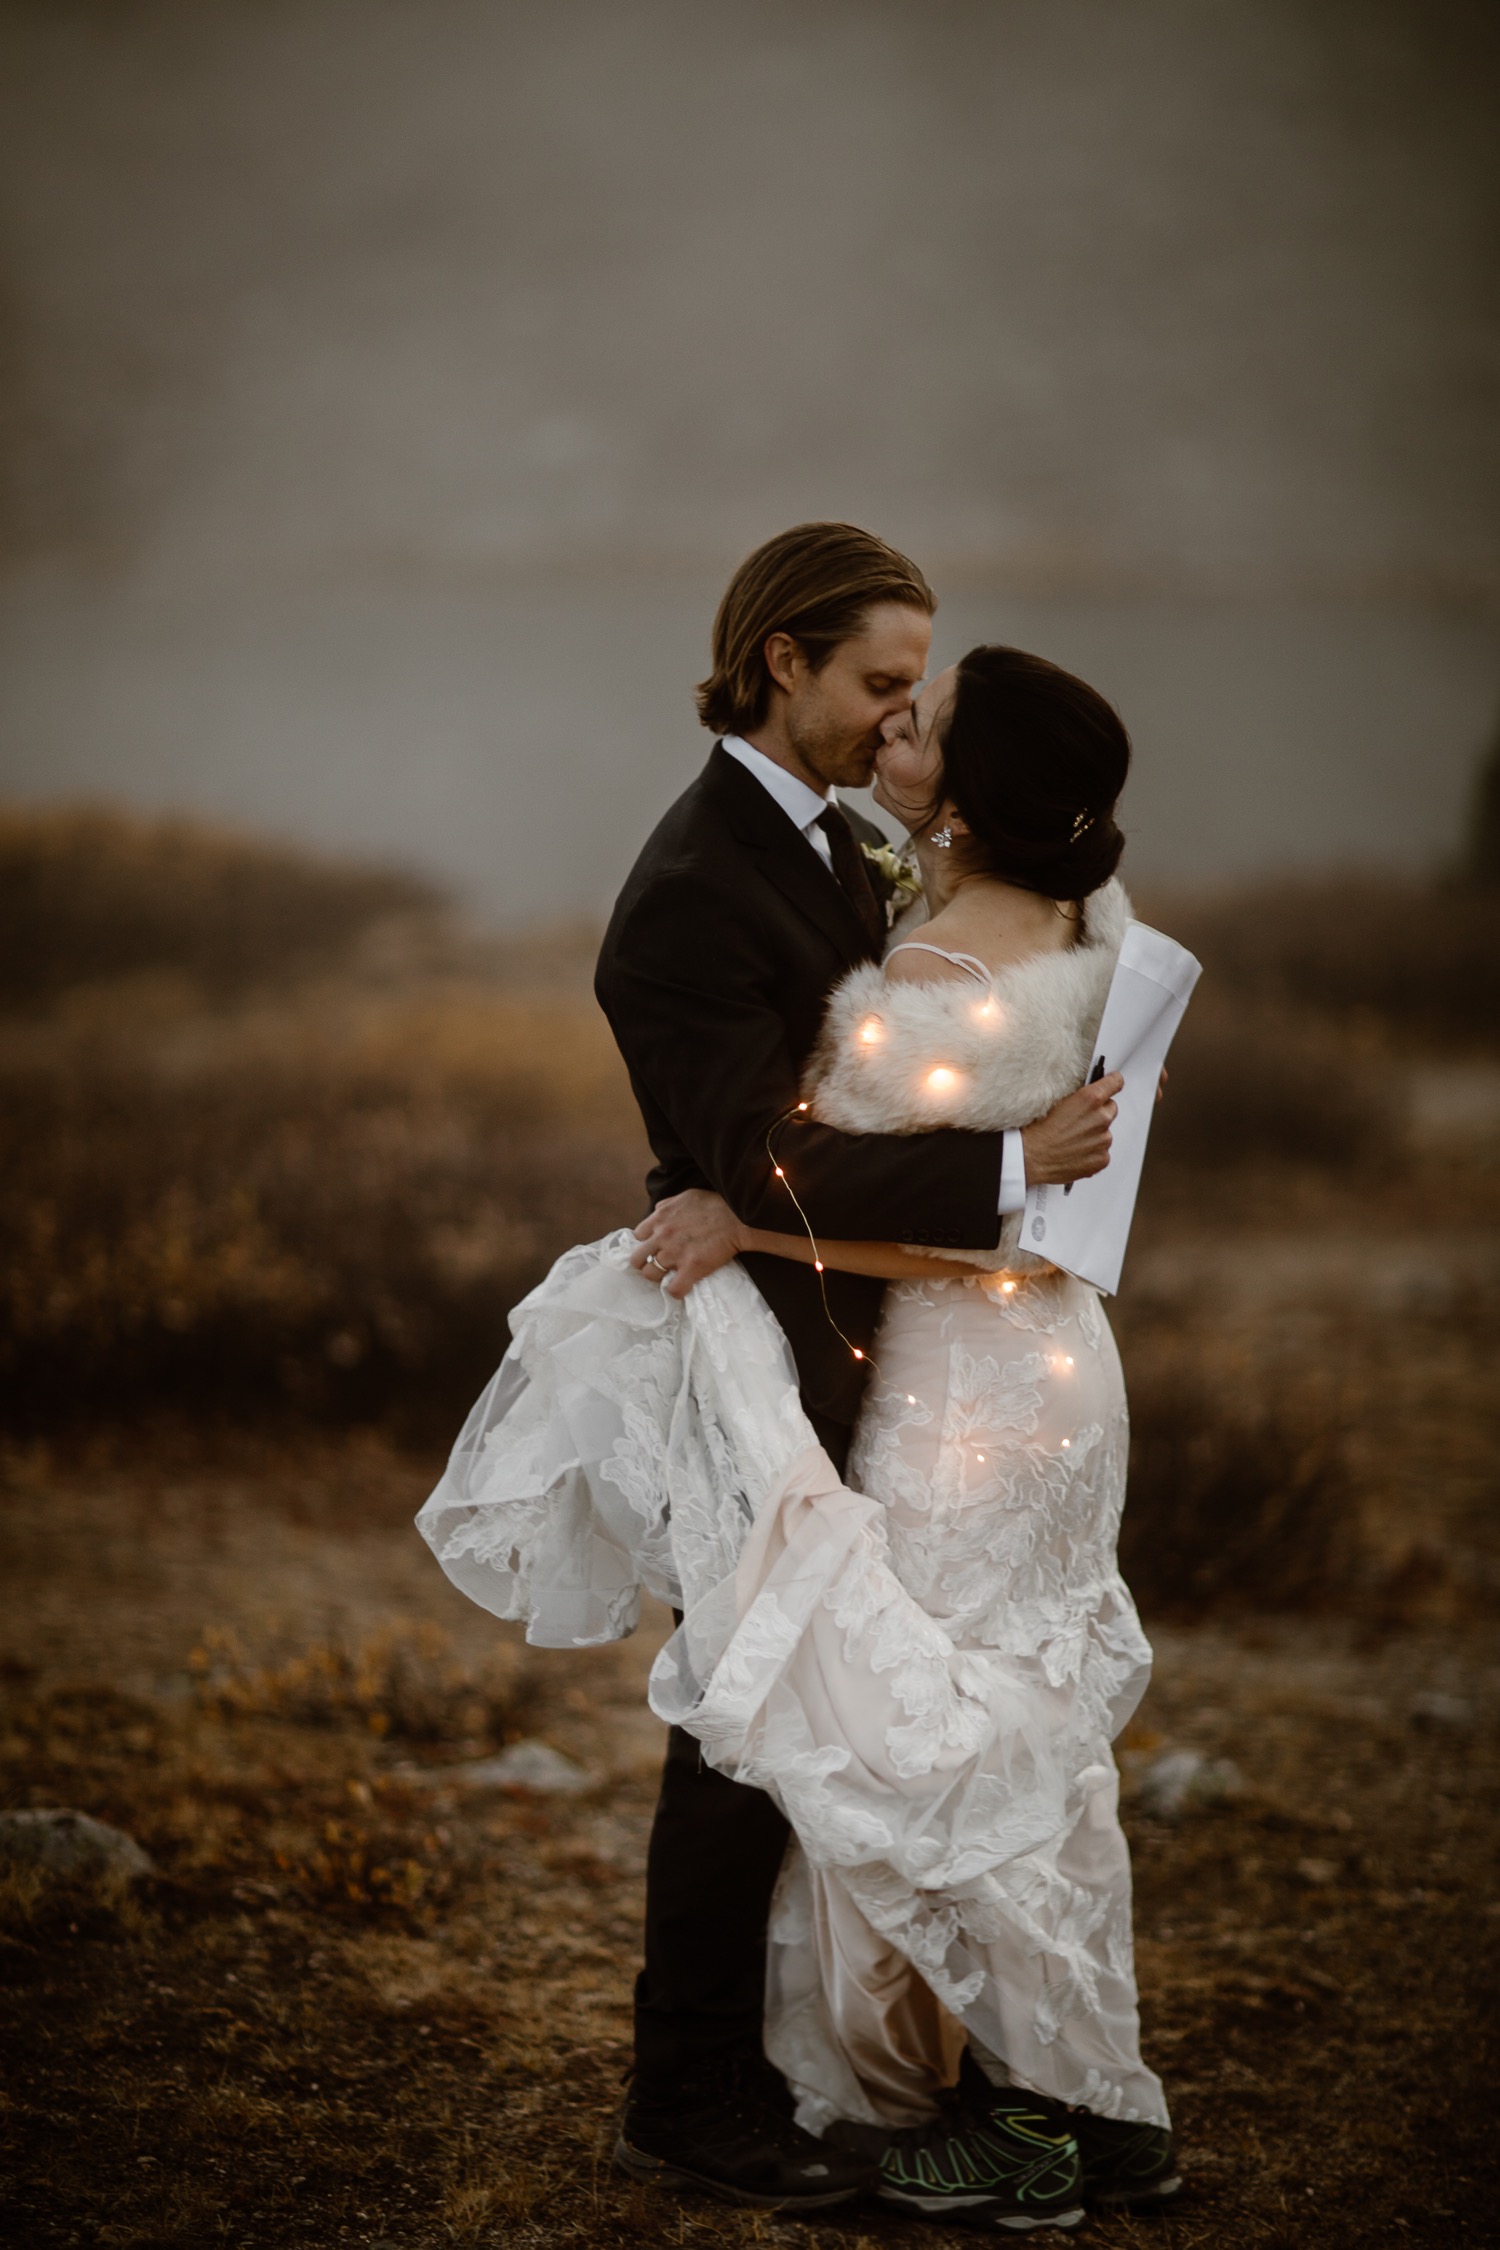 Walking On Clouds For This Hiking Foggy Fall Mountain Elopement In The Colorado Rockies